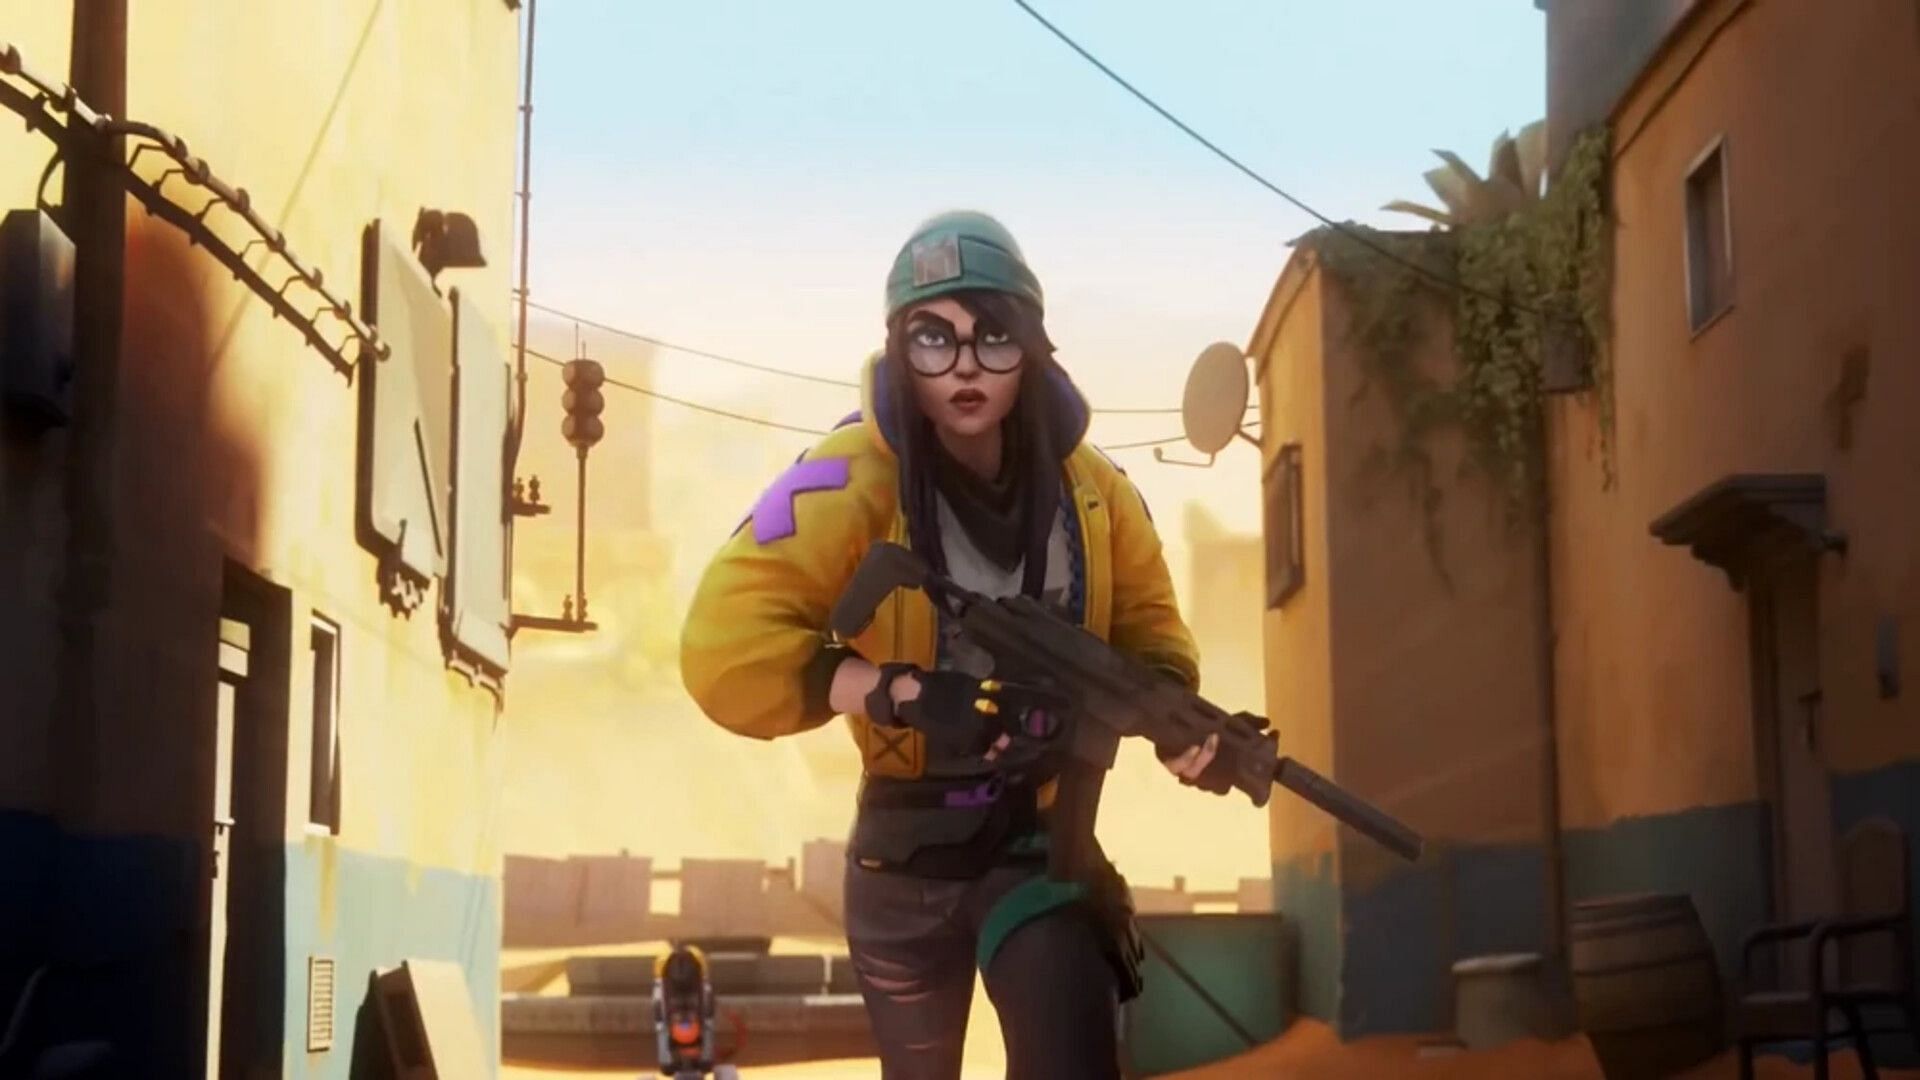 Killjoy as seen in the cinematic (Image via Riot Games)